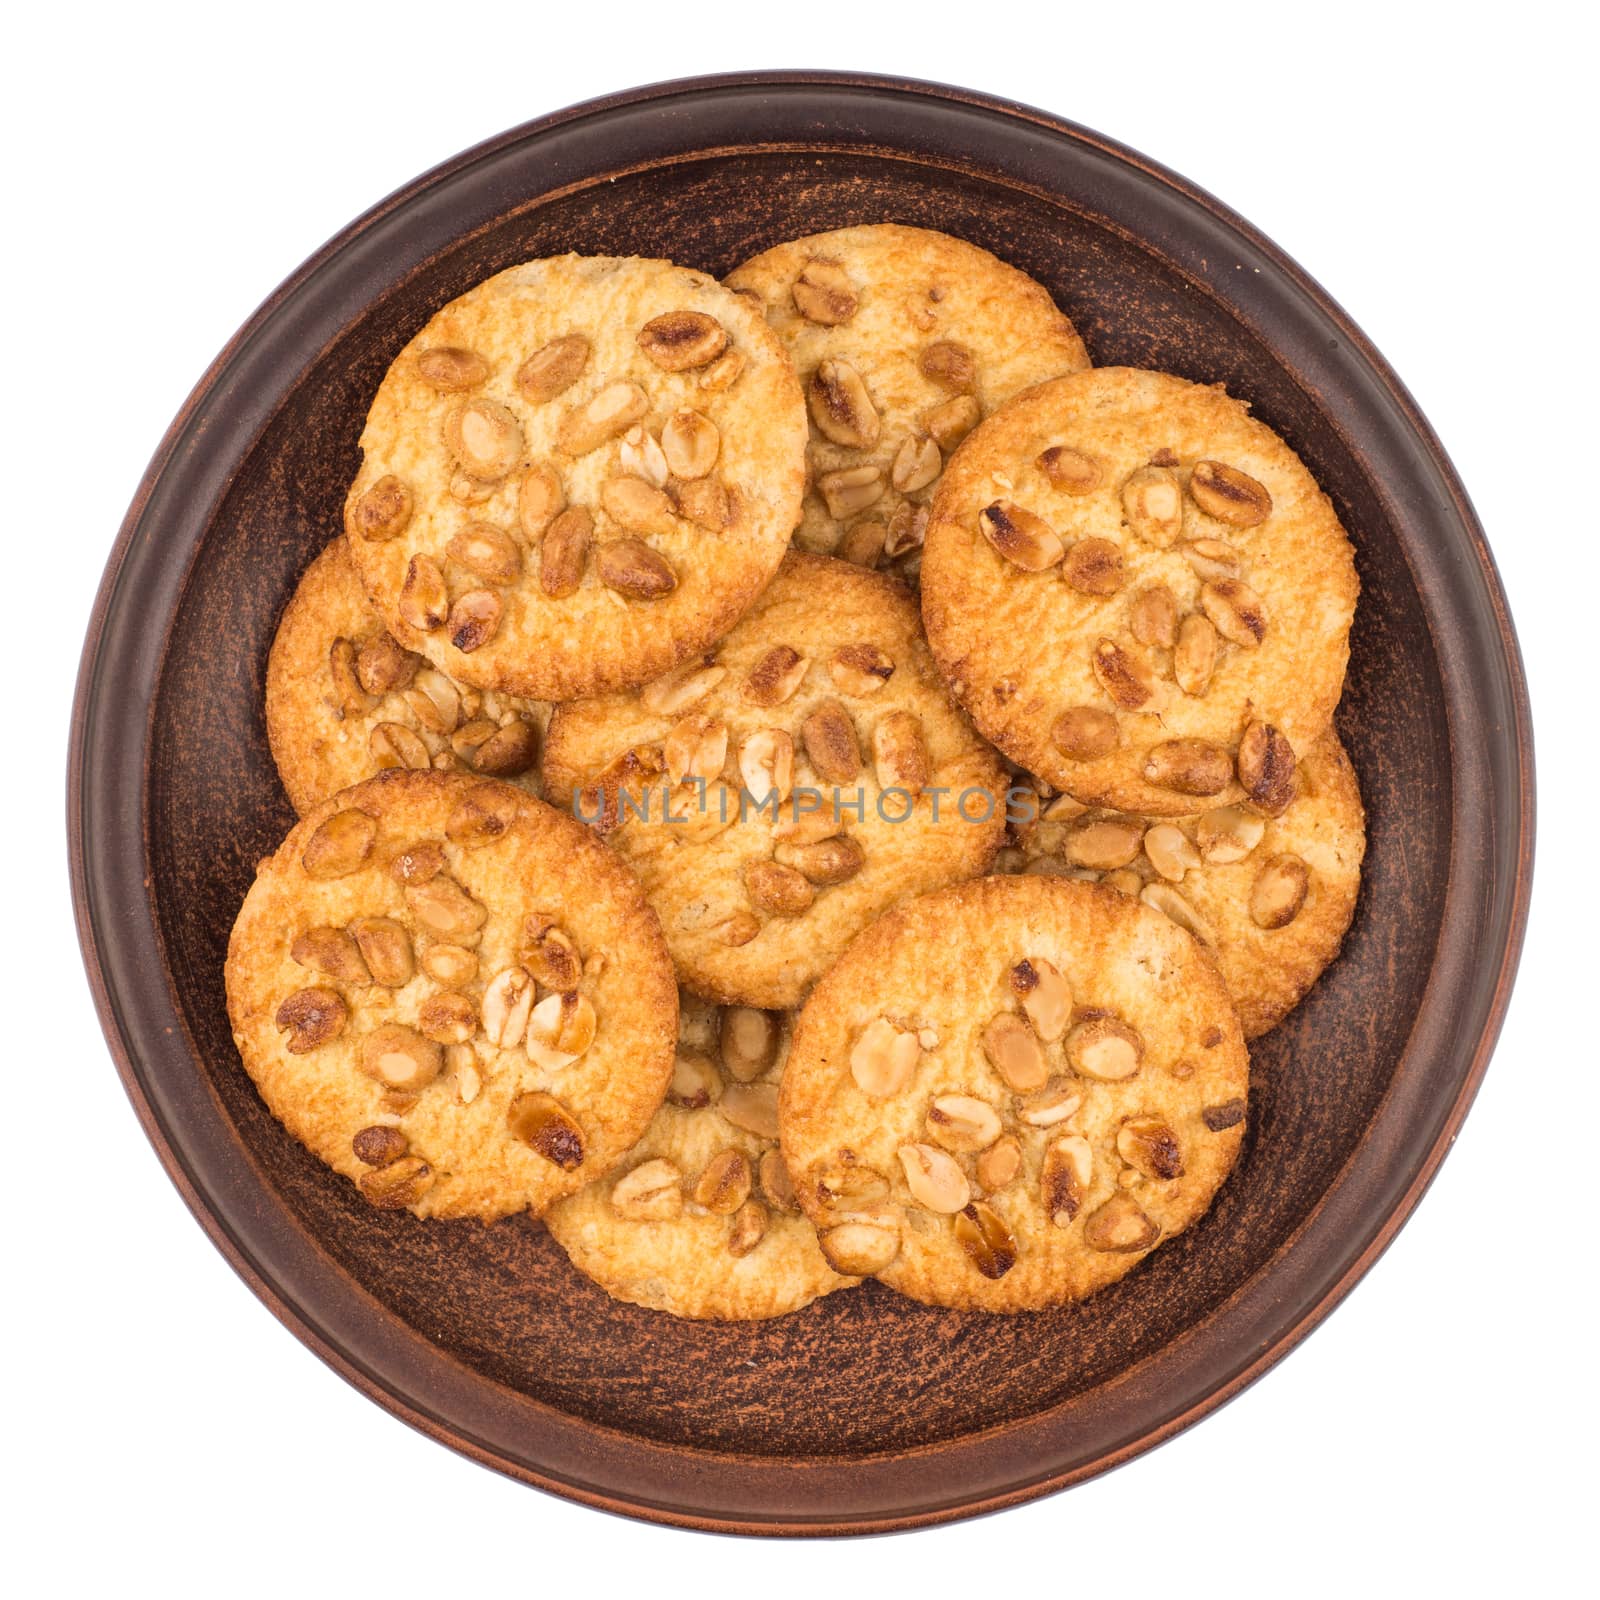 Peanut cookies in a brown plate. Isolated on white background. Top view.